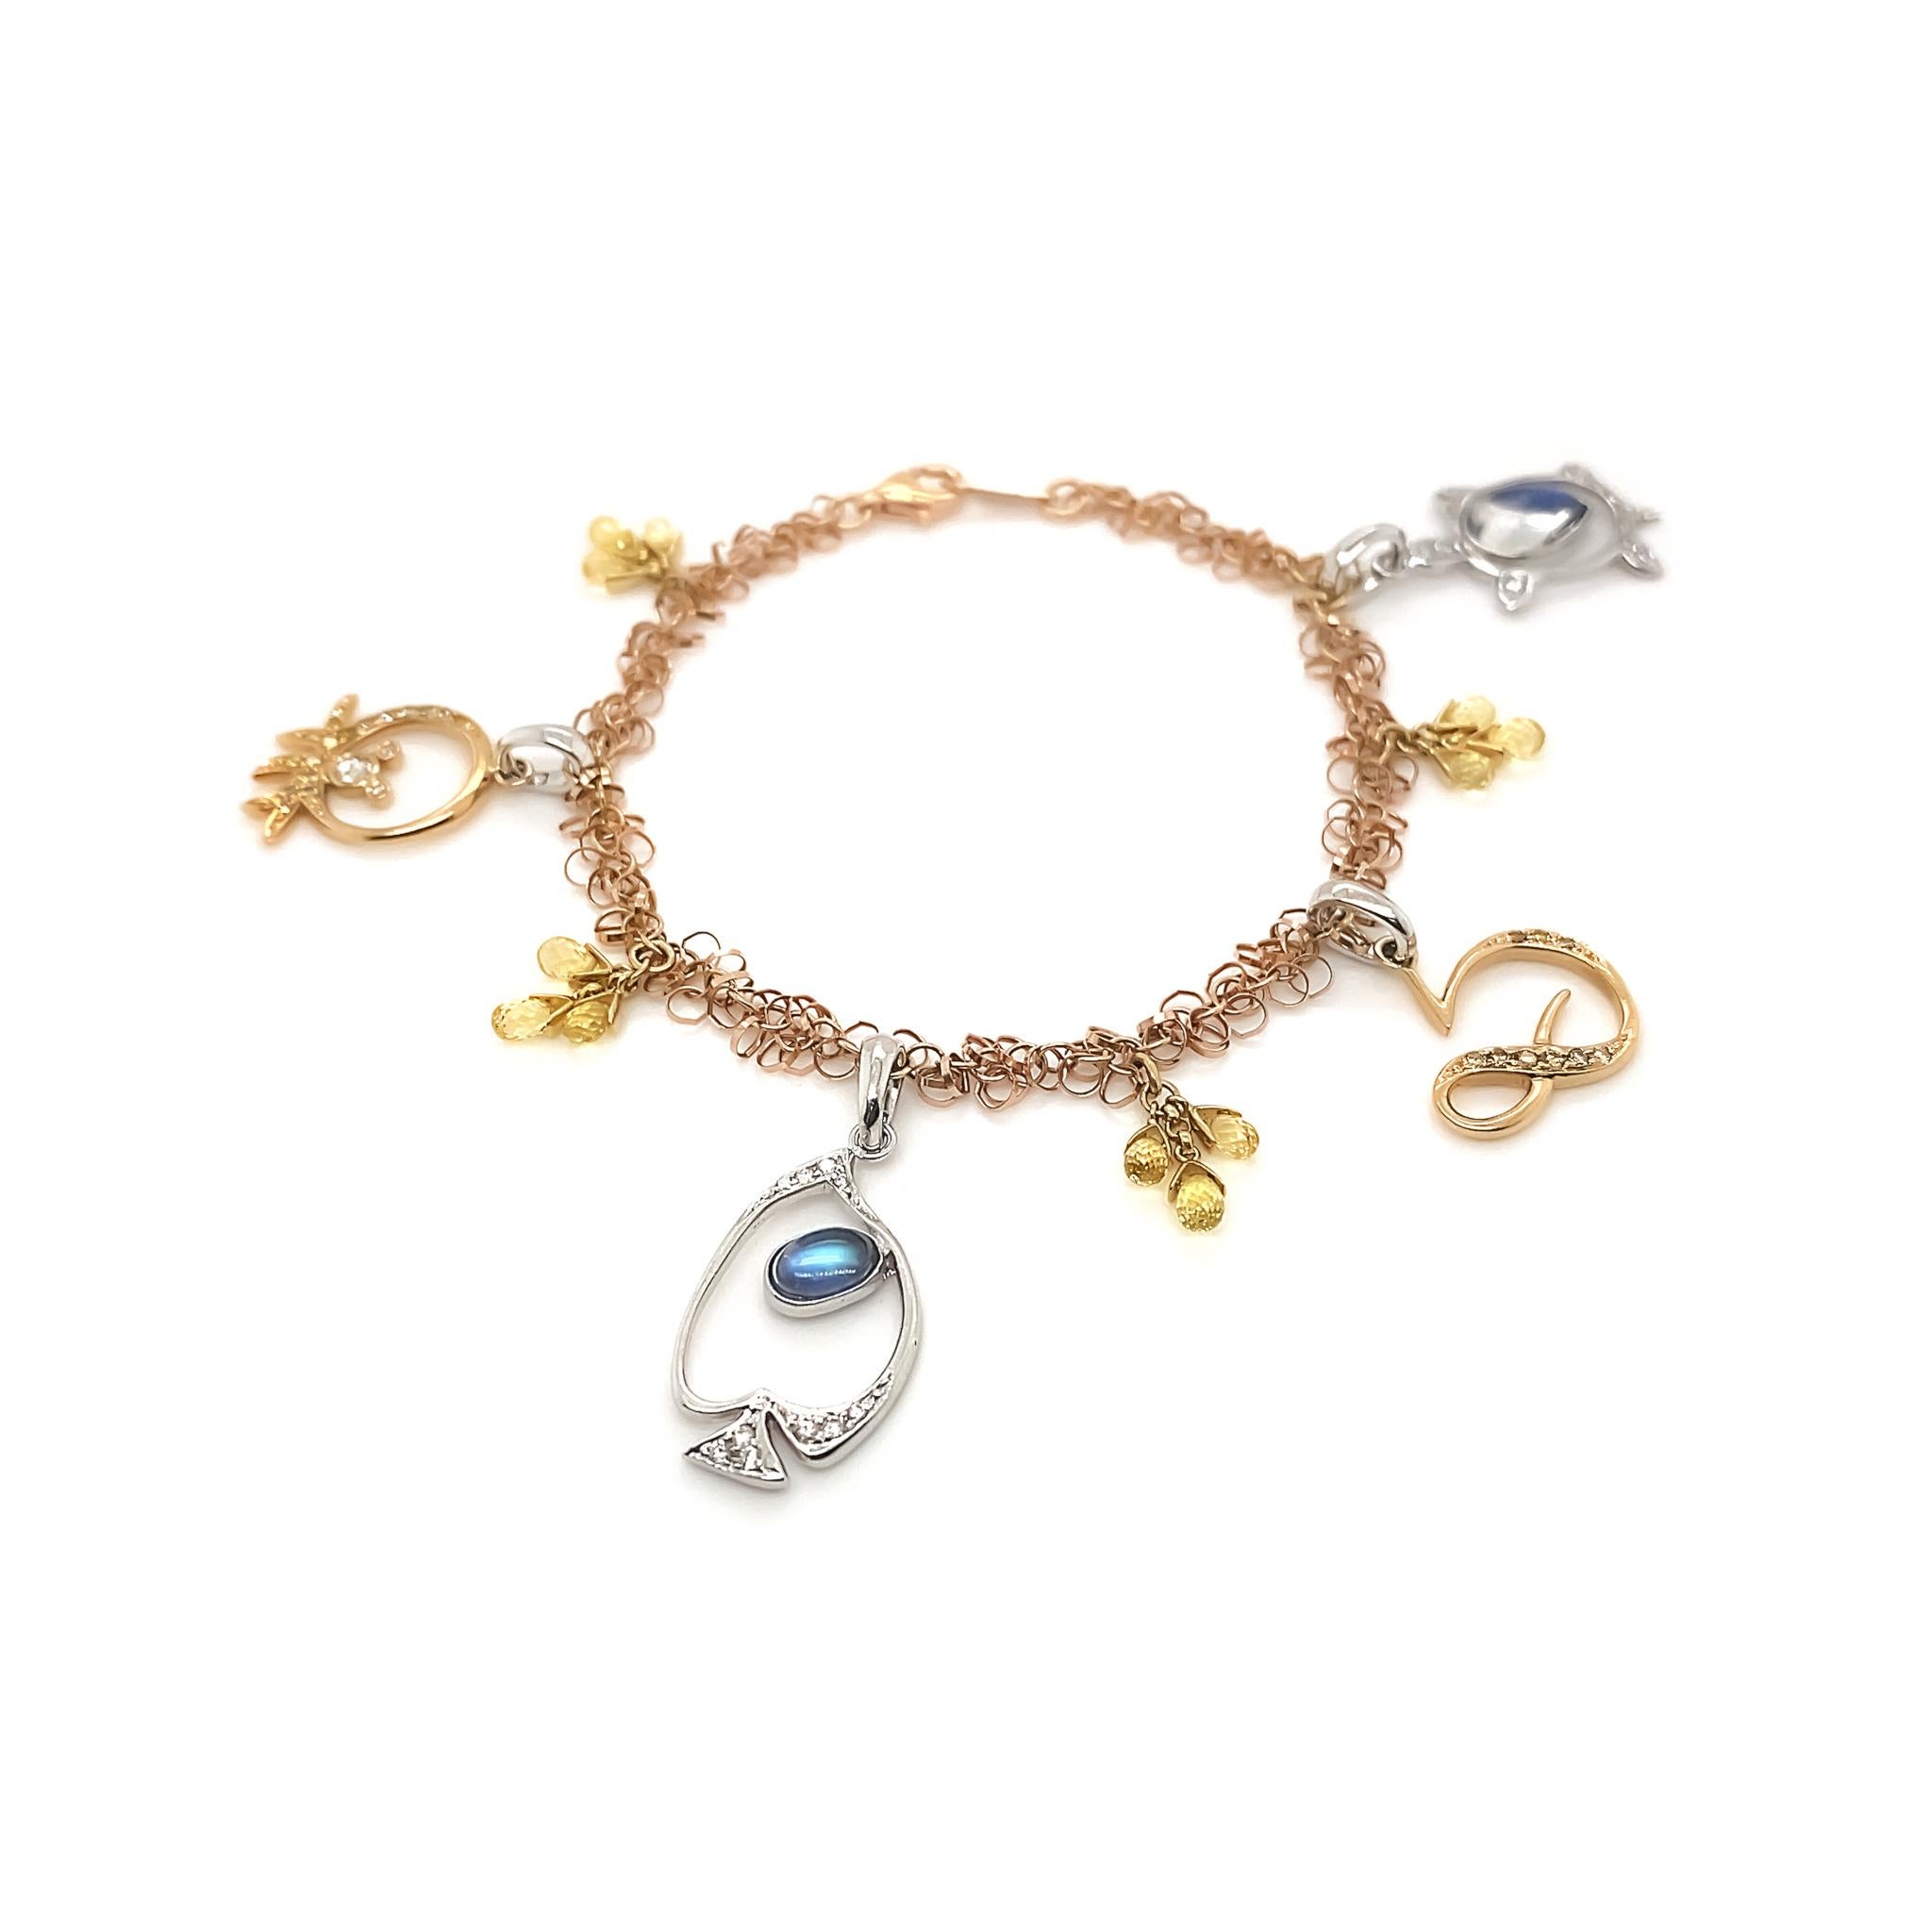 Adjustable tropical holiday-themed 18K Rose Gold chain bracelet. Chain made in Italy, detachable charms designed and handcrafted in-house by Dilys' in Hong Kong.  

26 Fancy Colour Diamonds, totalling 0.25ct
23 Collection-grade Round Diamonds,